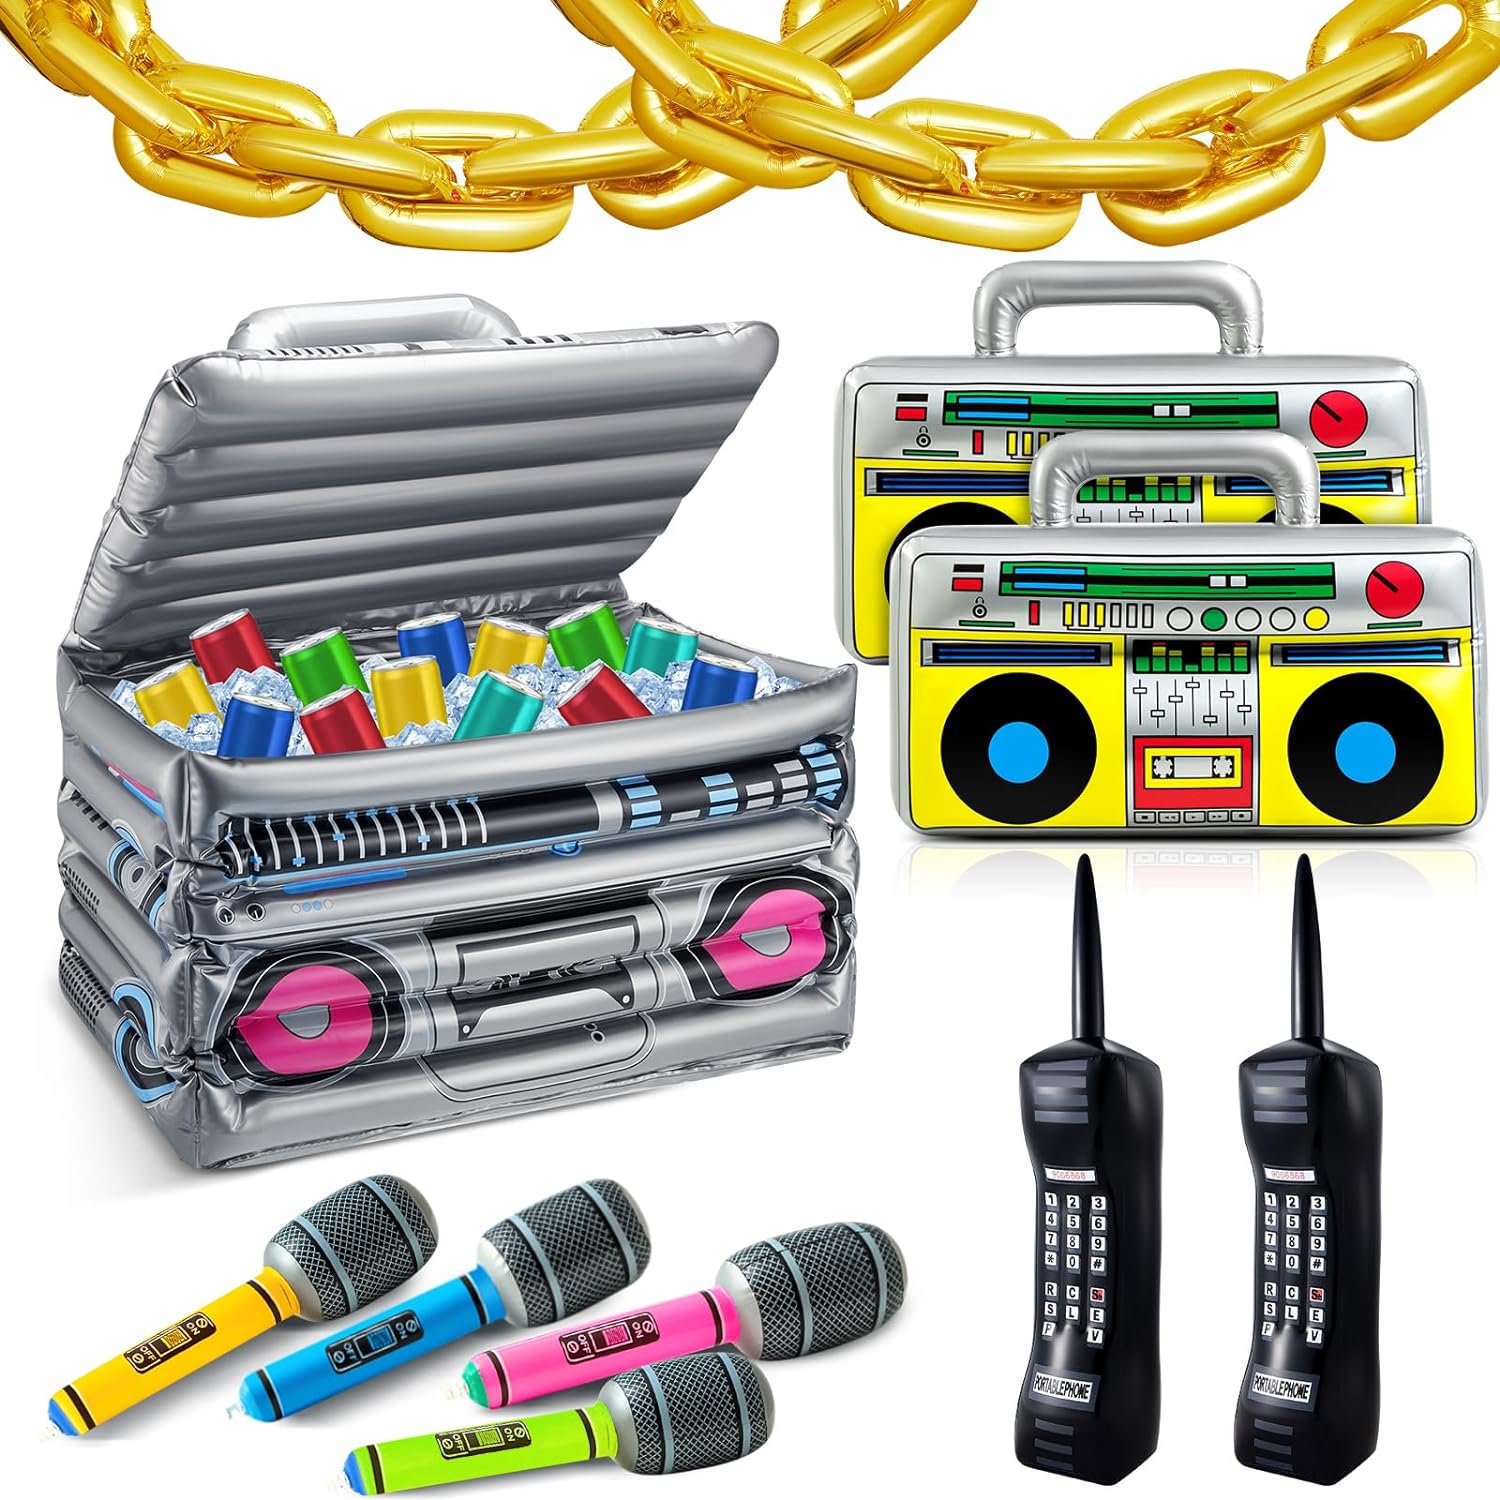 Great Choice Products 29 Pcs 80S 90S Party Decorations Include Inflatable Boom Box Beverage Cooler 20 Gold Foil Chain Balloons 2 Mobile Phones 2 Ra…